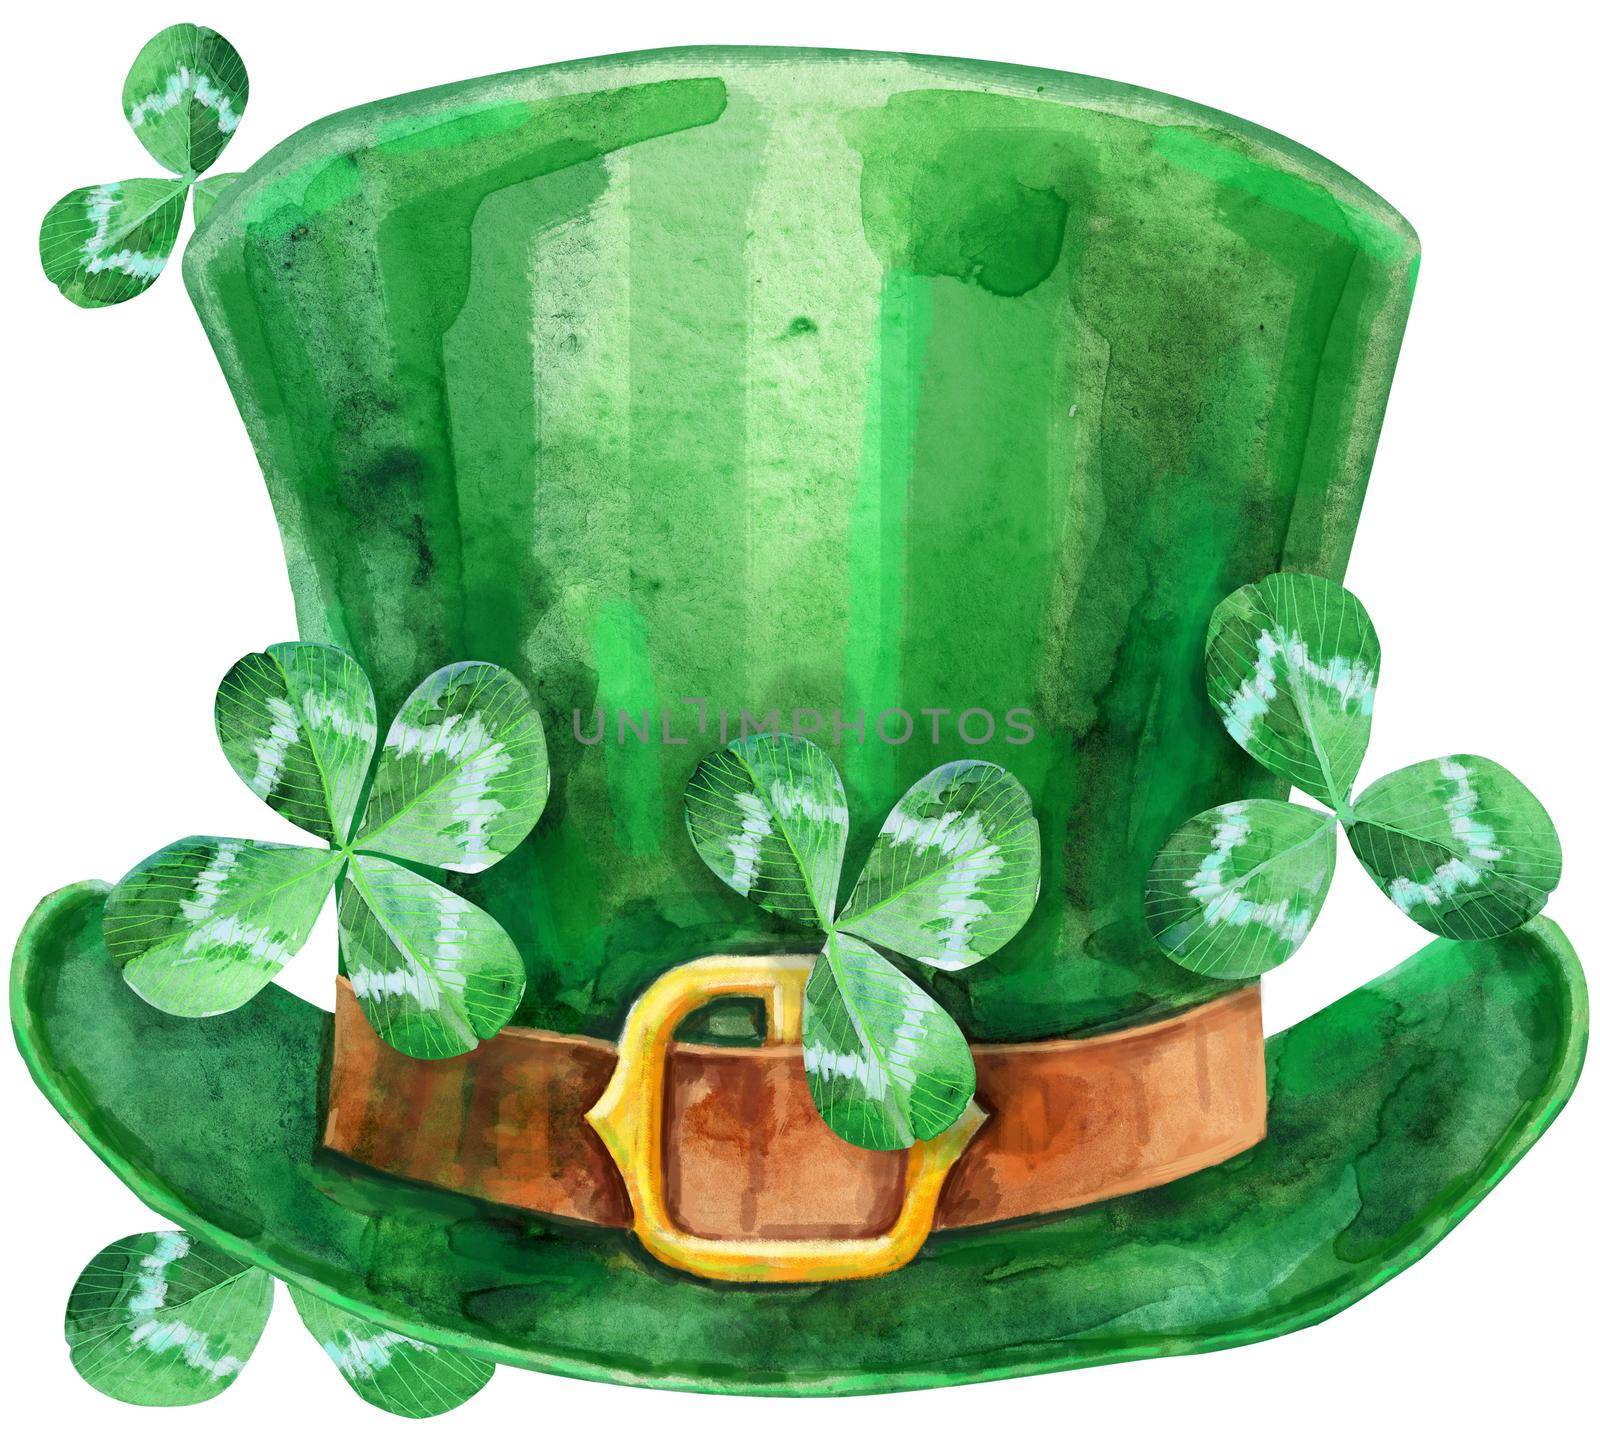 Watercolor Leprechaun Hat with clover leaves, St Patrick's Day Hat Illustration by NataOmsk